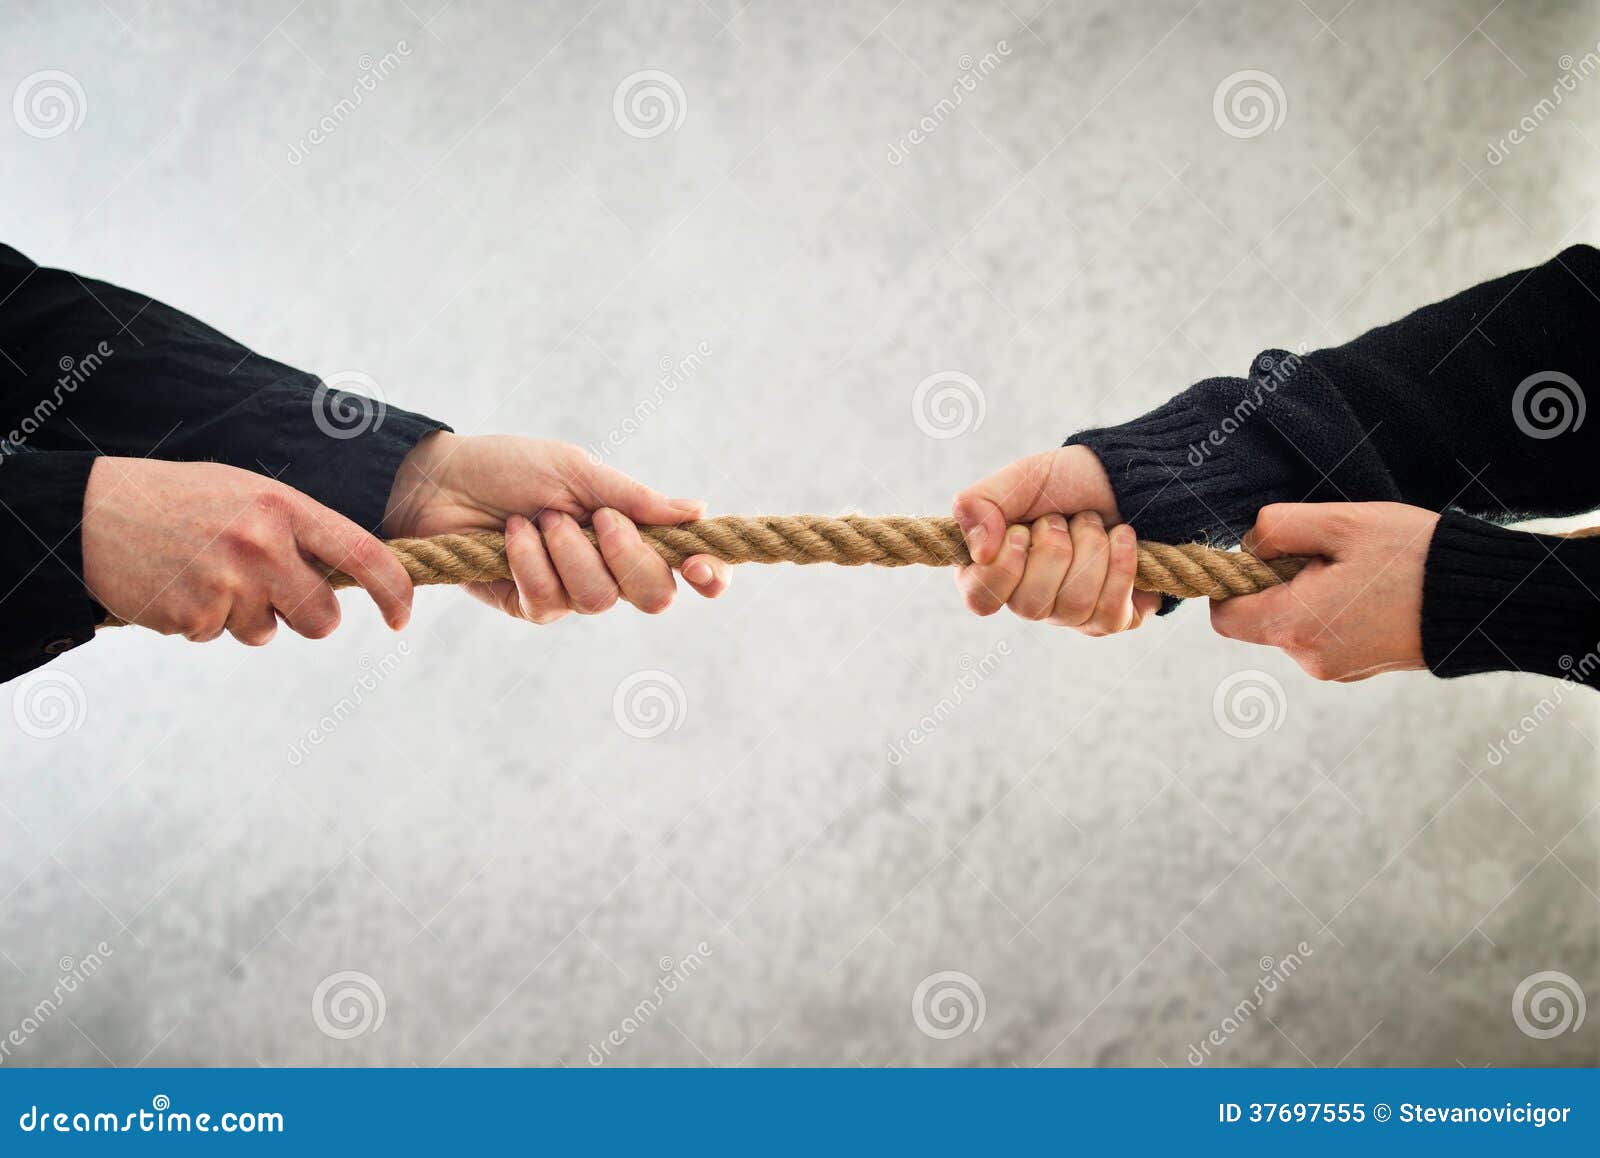 https://thumbs.dreamstime.com/z/hands-pulling-rope-to-opposite-sides-37697555.jpg